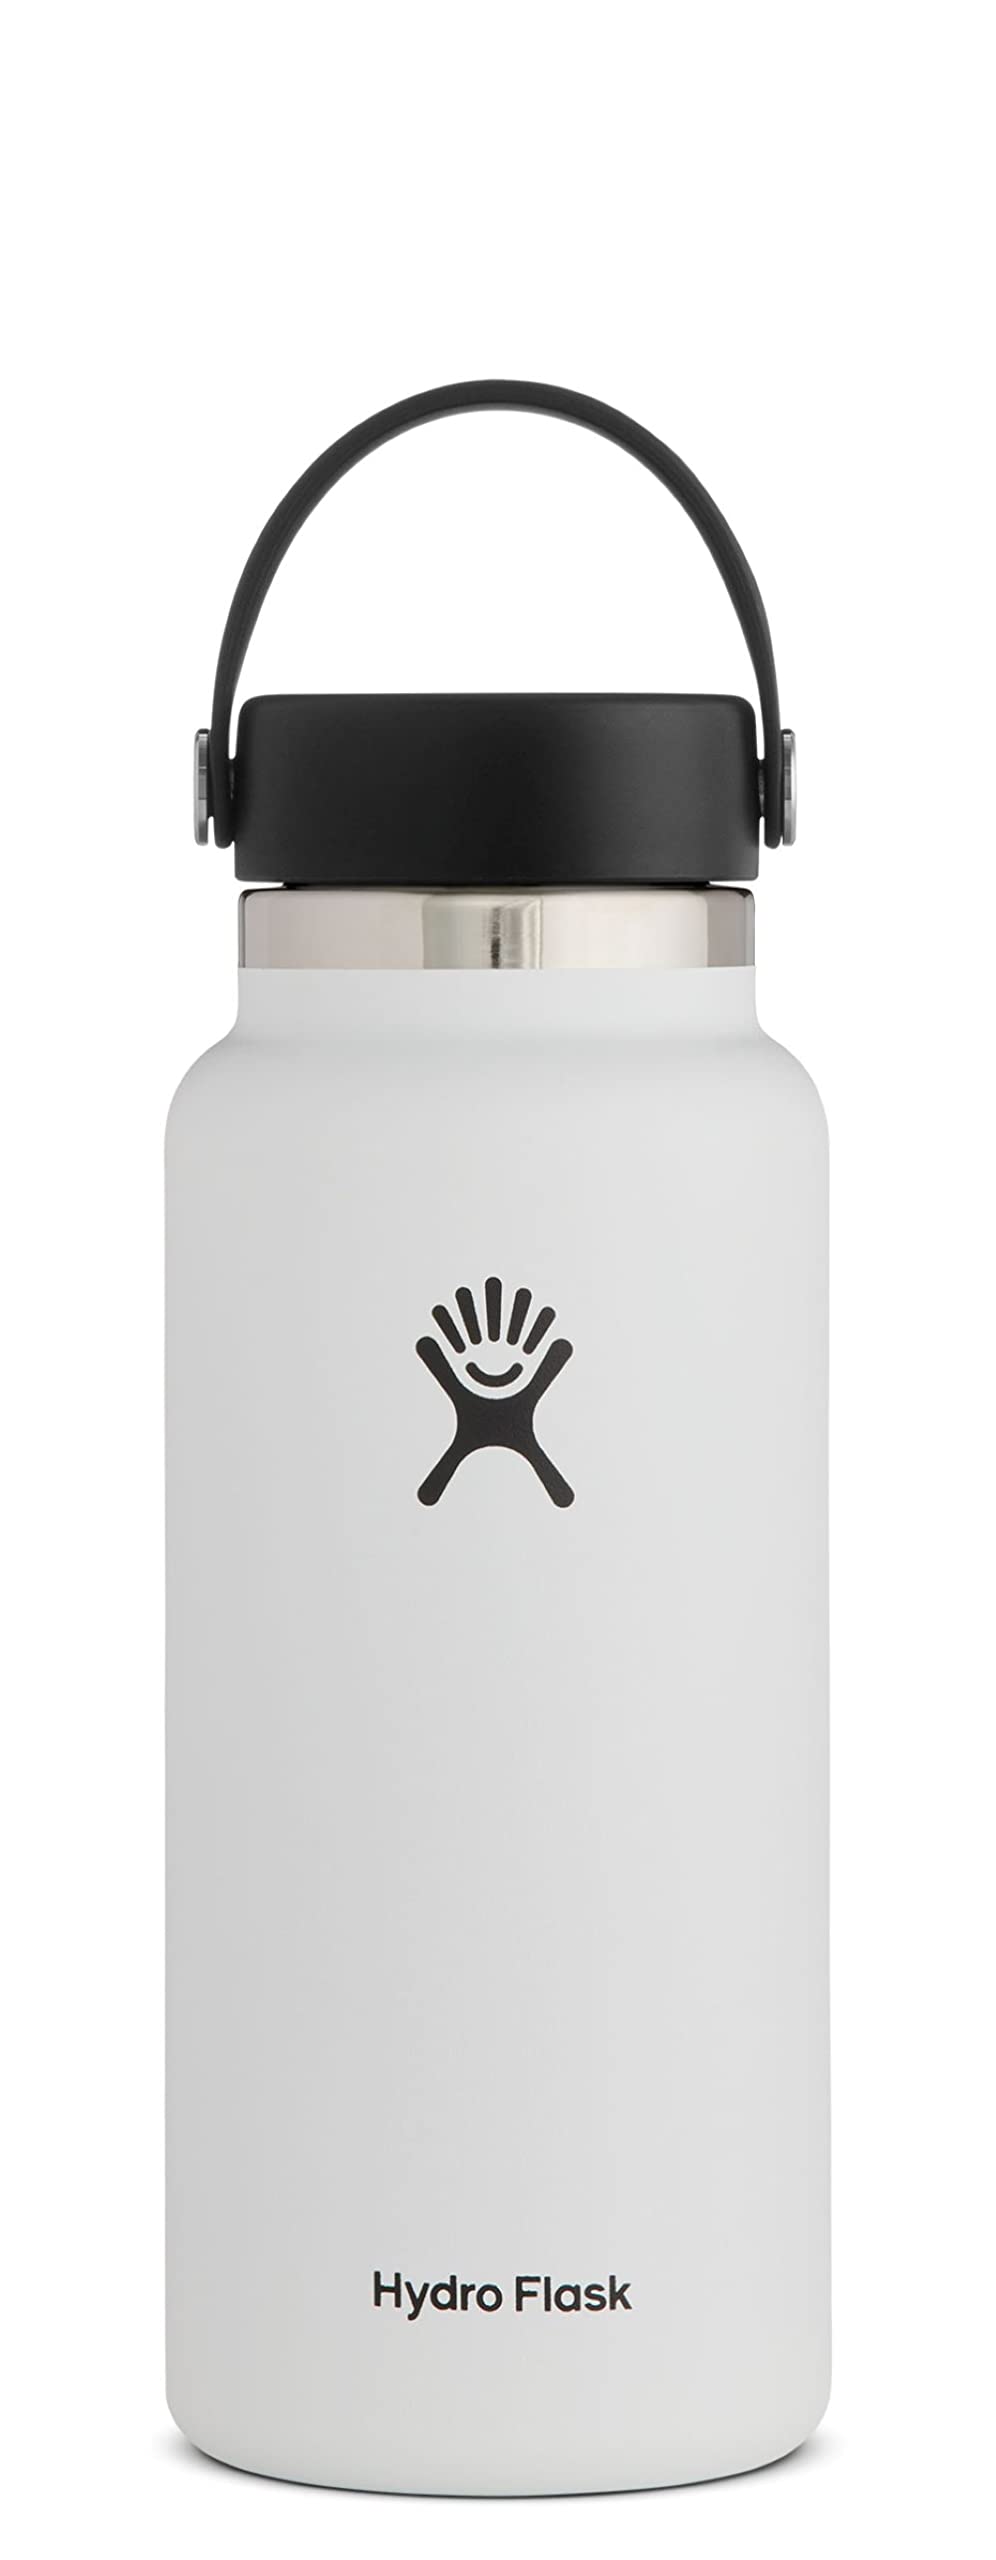 Hydro Flask 32 oz Vacuum Insulated Stainless Steel Water Bottle Flask - Flex Cap with Strap  - Wide Mouth - White